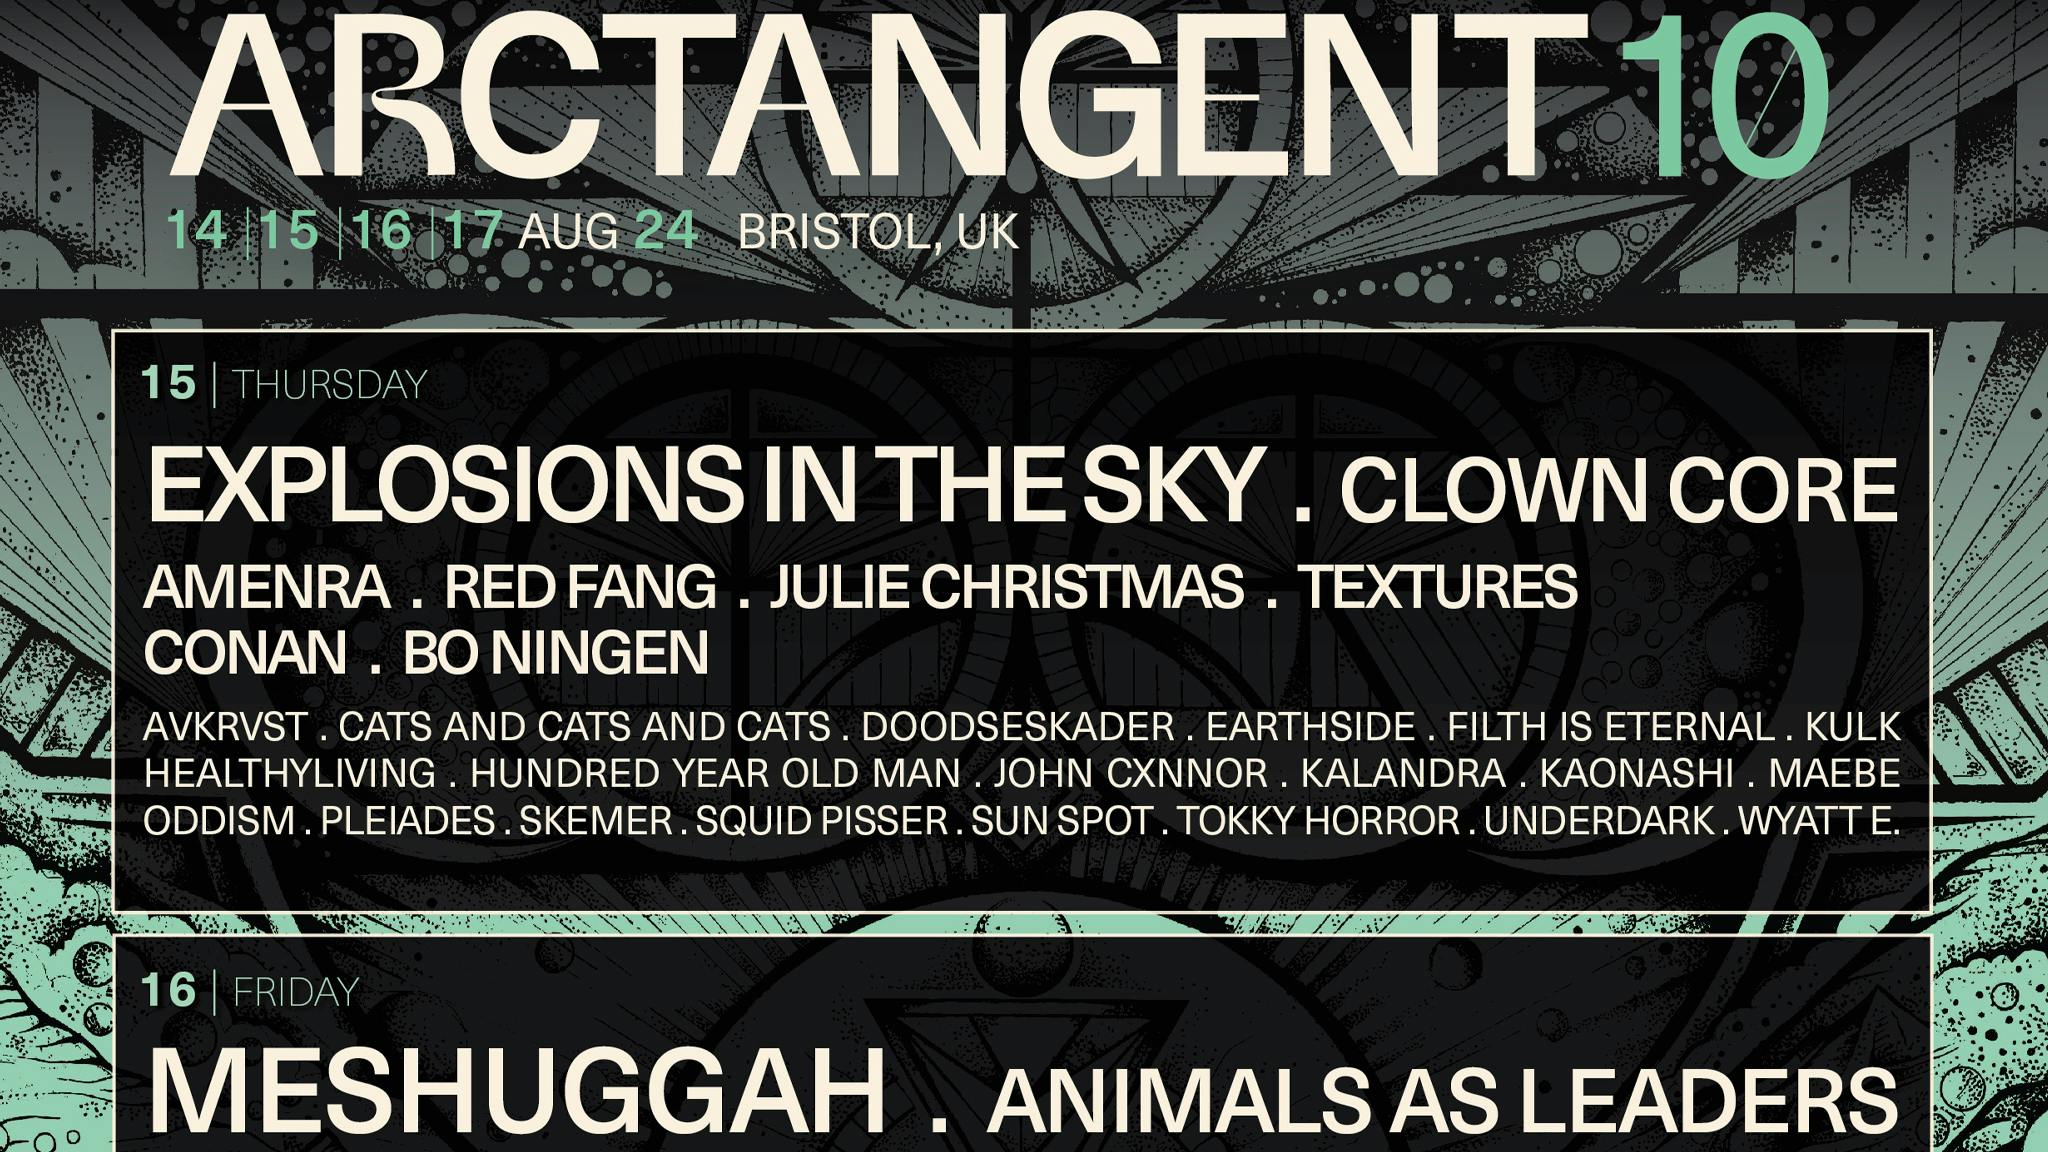 “It’s going to be biblical!”: ArcTanGent announce Mogwai, Electric Wizard, Explosions In The Sky and loads more